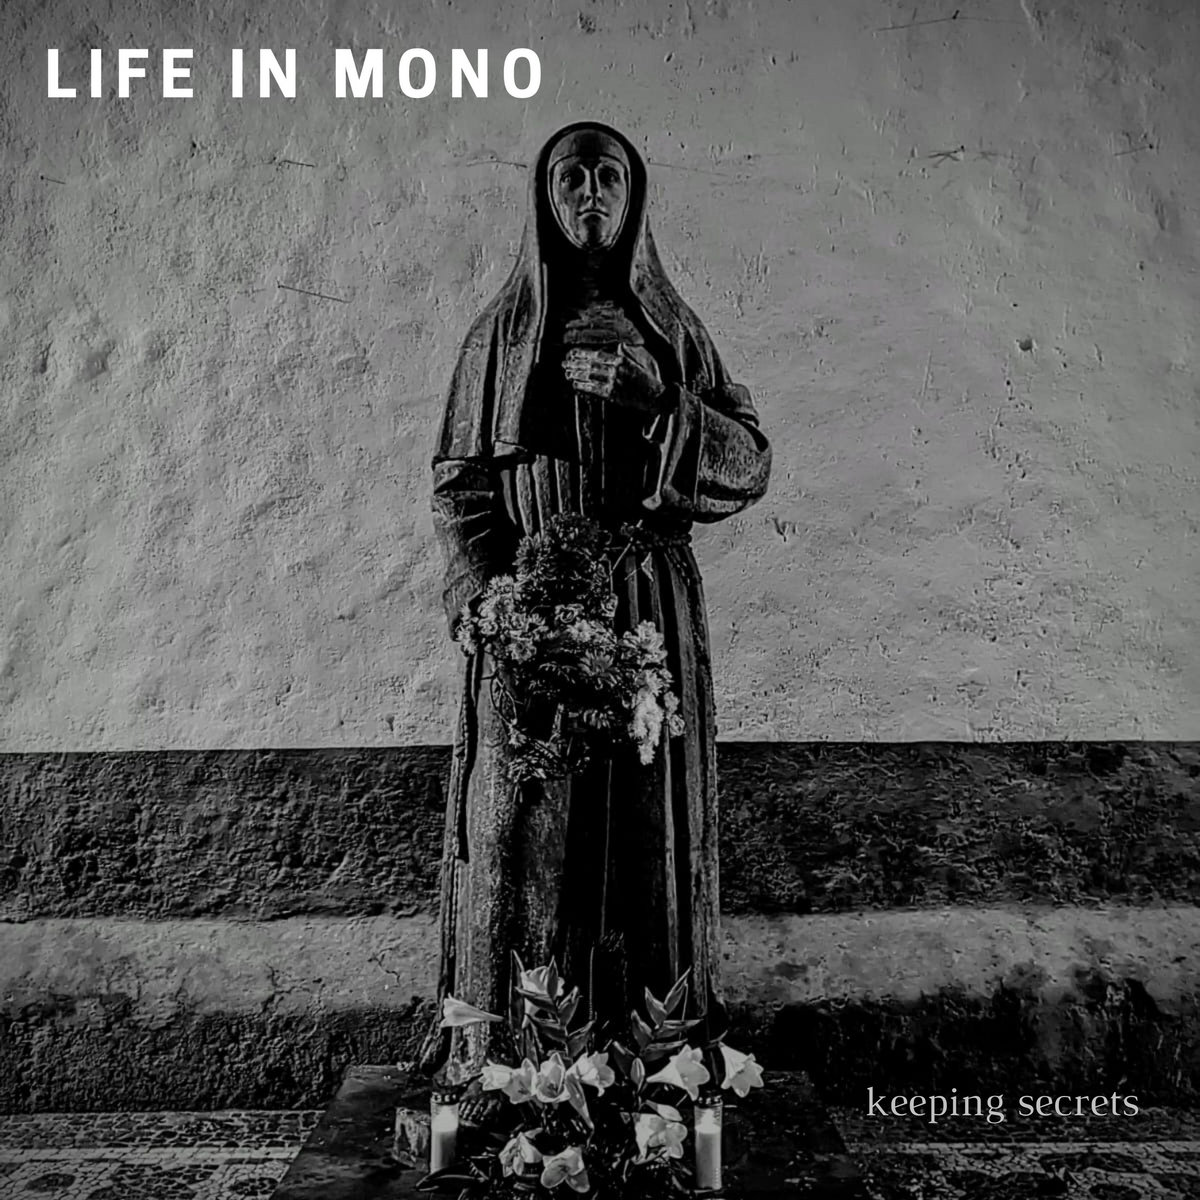 HOT TRACK: “Keeping Secrets” by Life in Mono